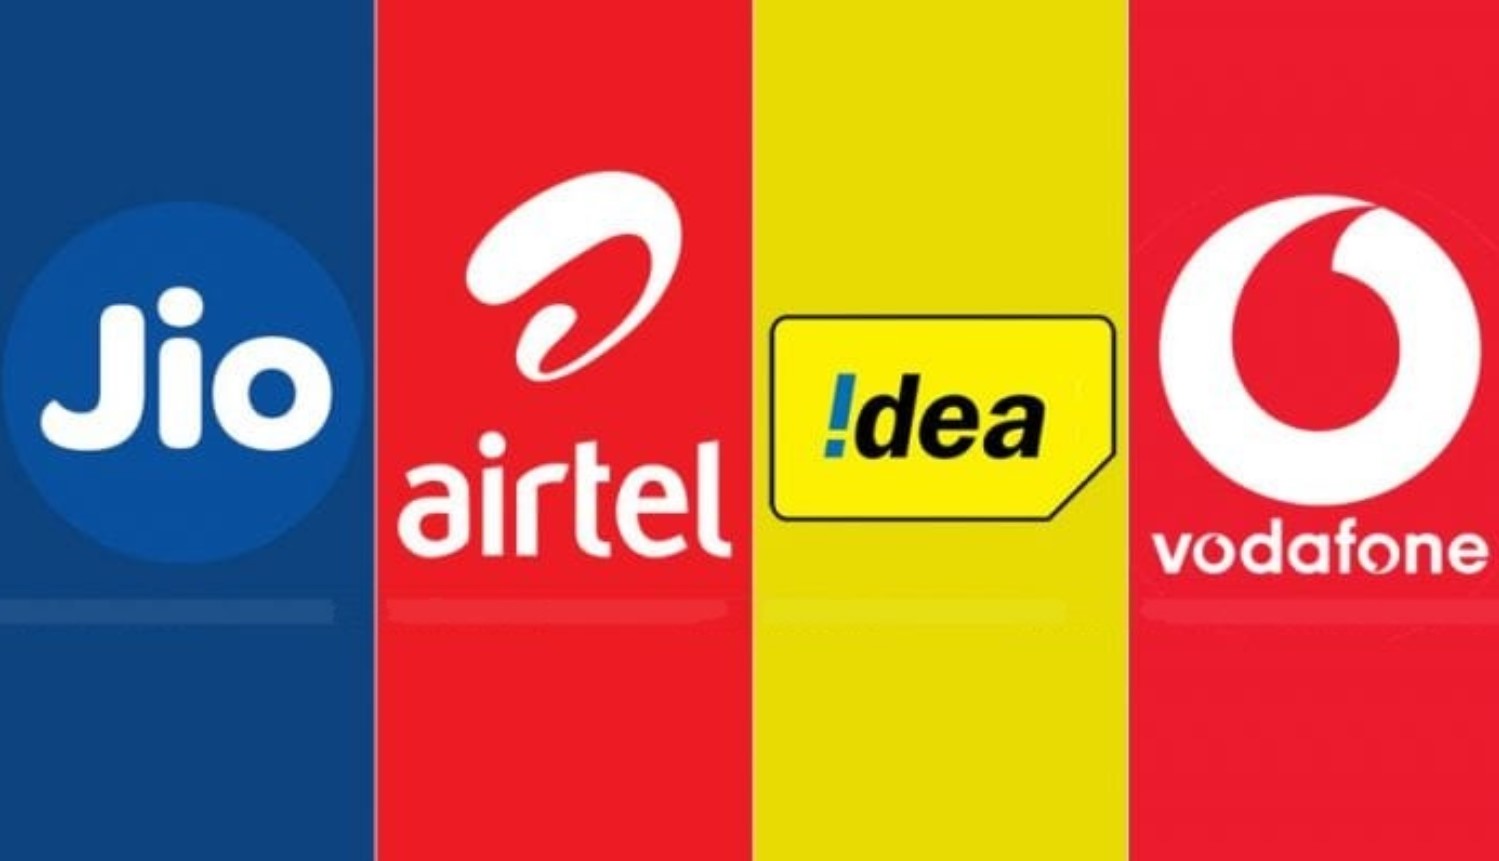 What an RJio tariff hike will mean for the telco, its rivals, and the sector